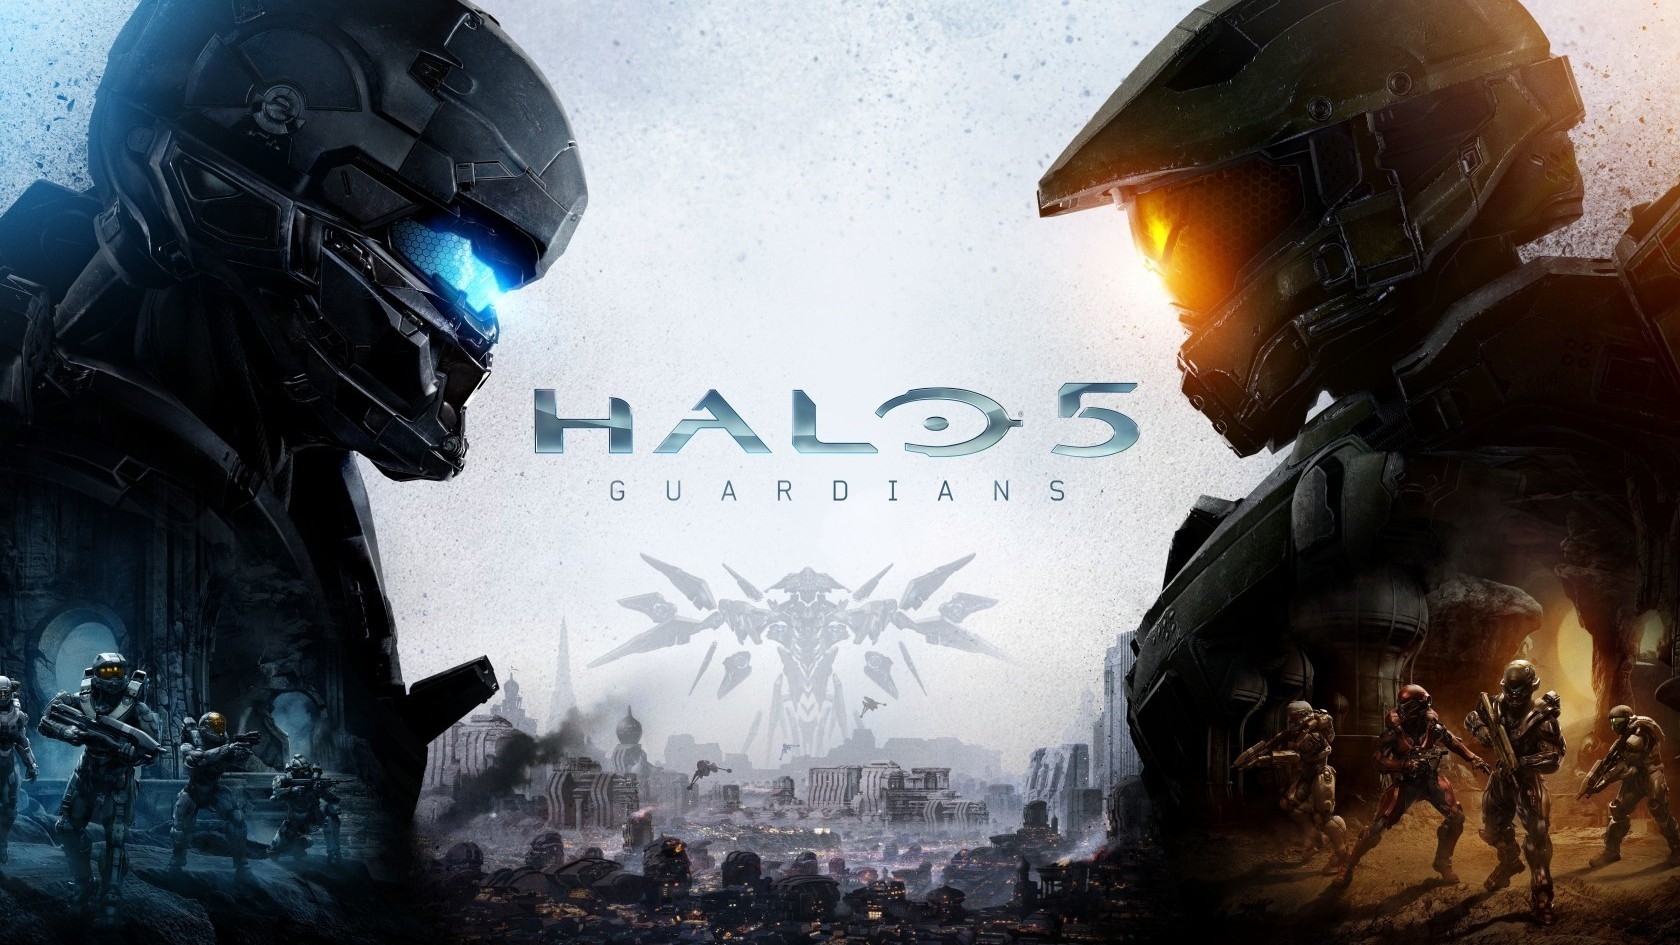 Halo 5 Guardians Game for 1680 x 945 HDTV resolution